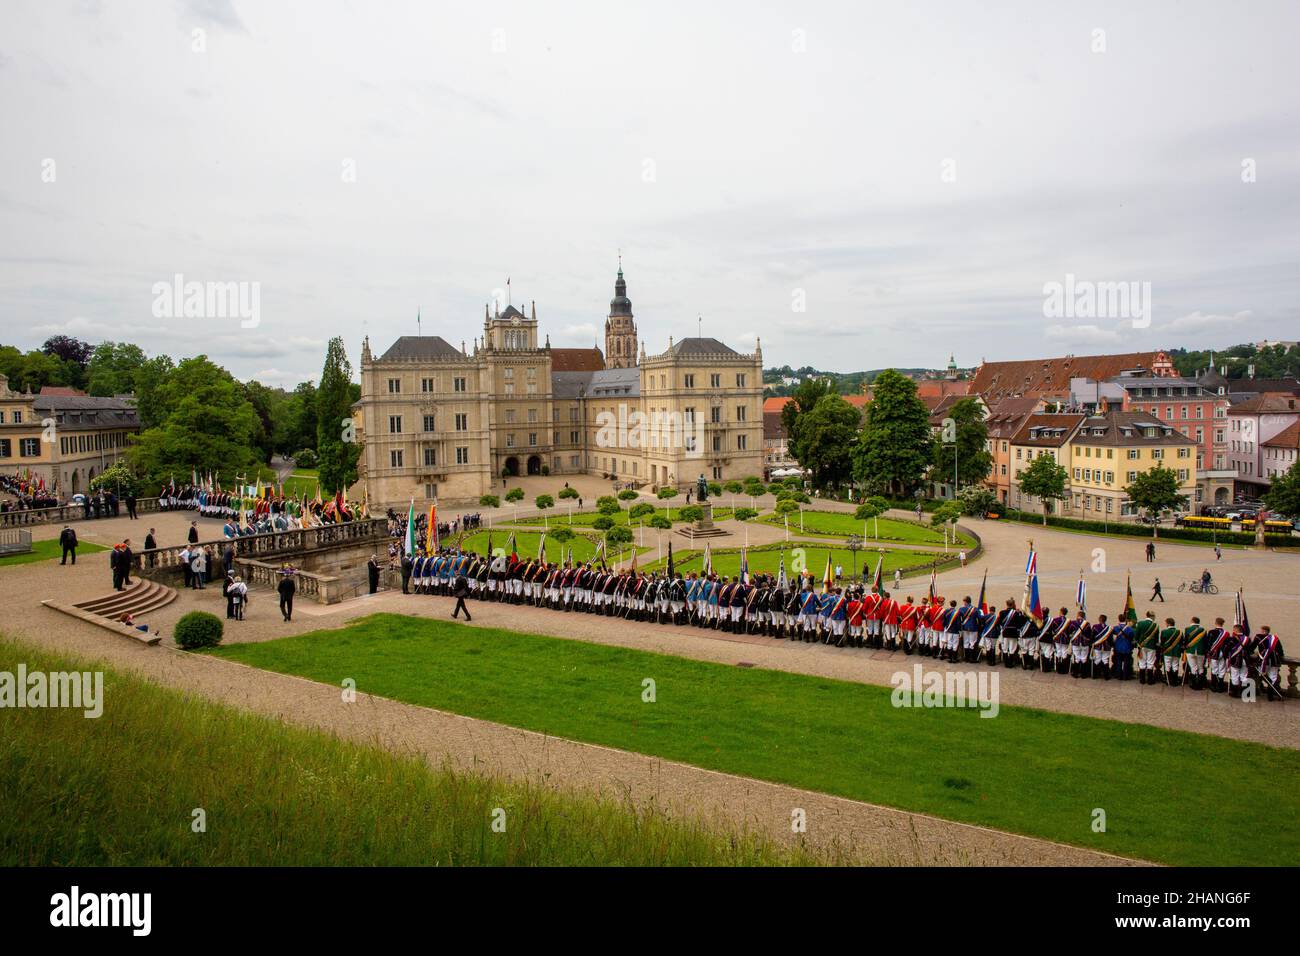 The 151st Coburg Covent is on this weekend in Coburg Germany. They gathered in front of Ehrenburg Castle for a parade and march through Hofgarten. Stock Photo